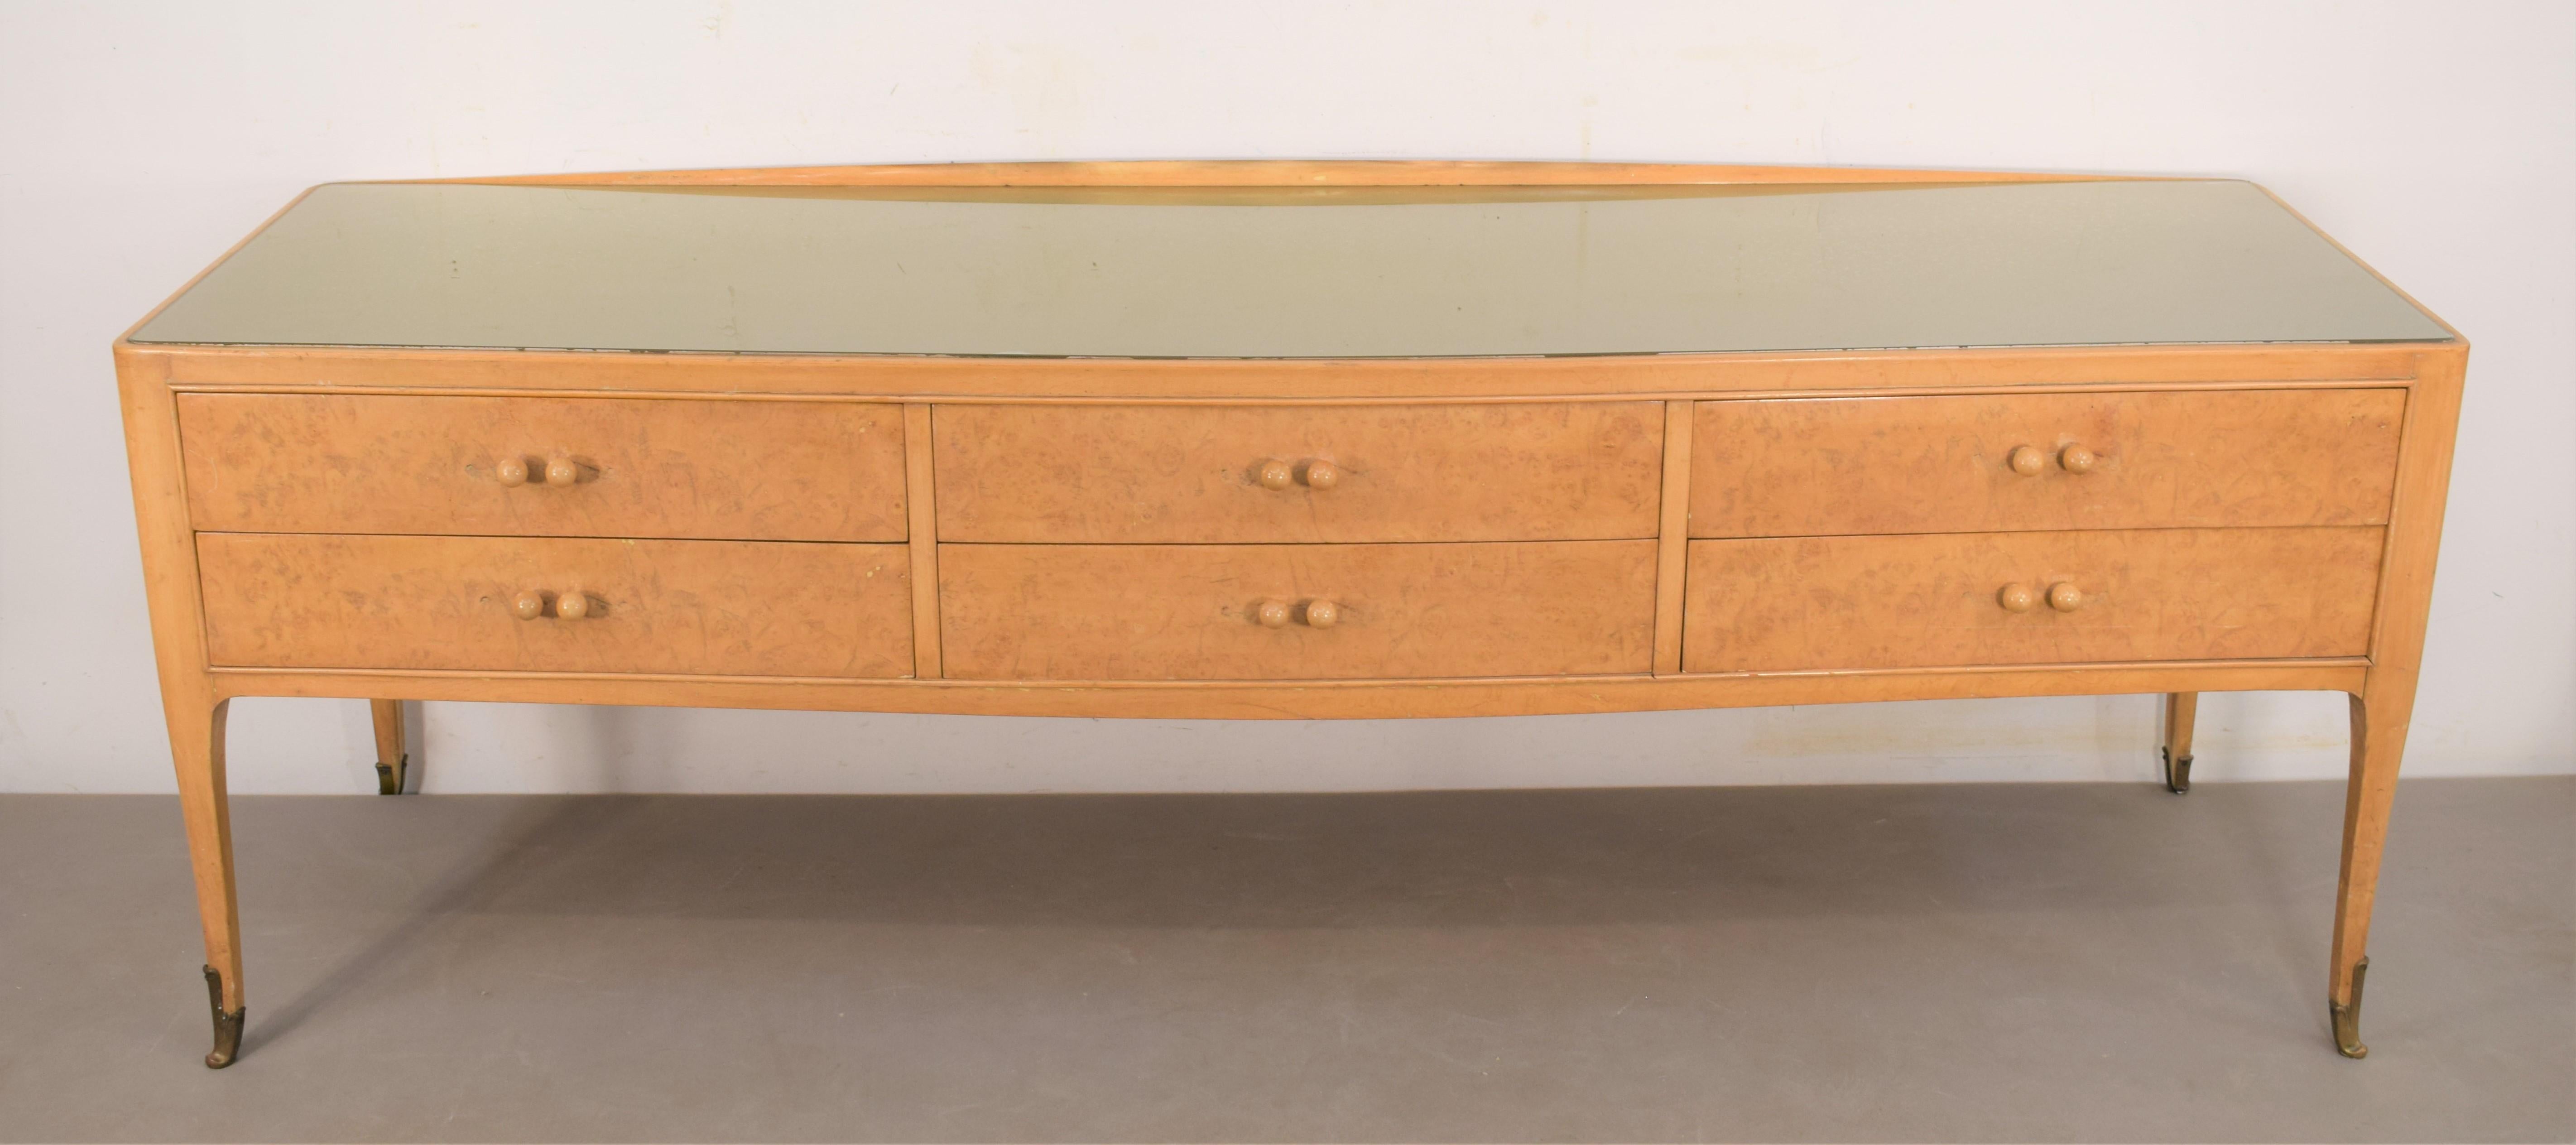 Italian dresser, in the style of Paolo Buffa, 1950s
Wood, coloured glass top, and brass feet details.
Measurements:
H: 64 cm ; D: 180 cm ; W: 53 cm.
   